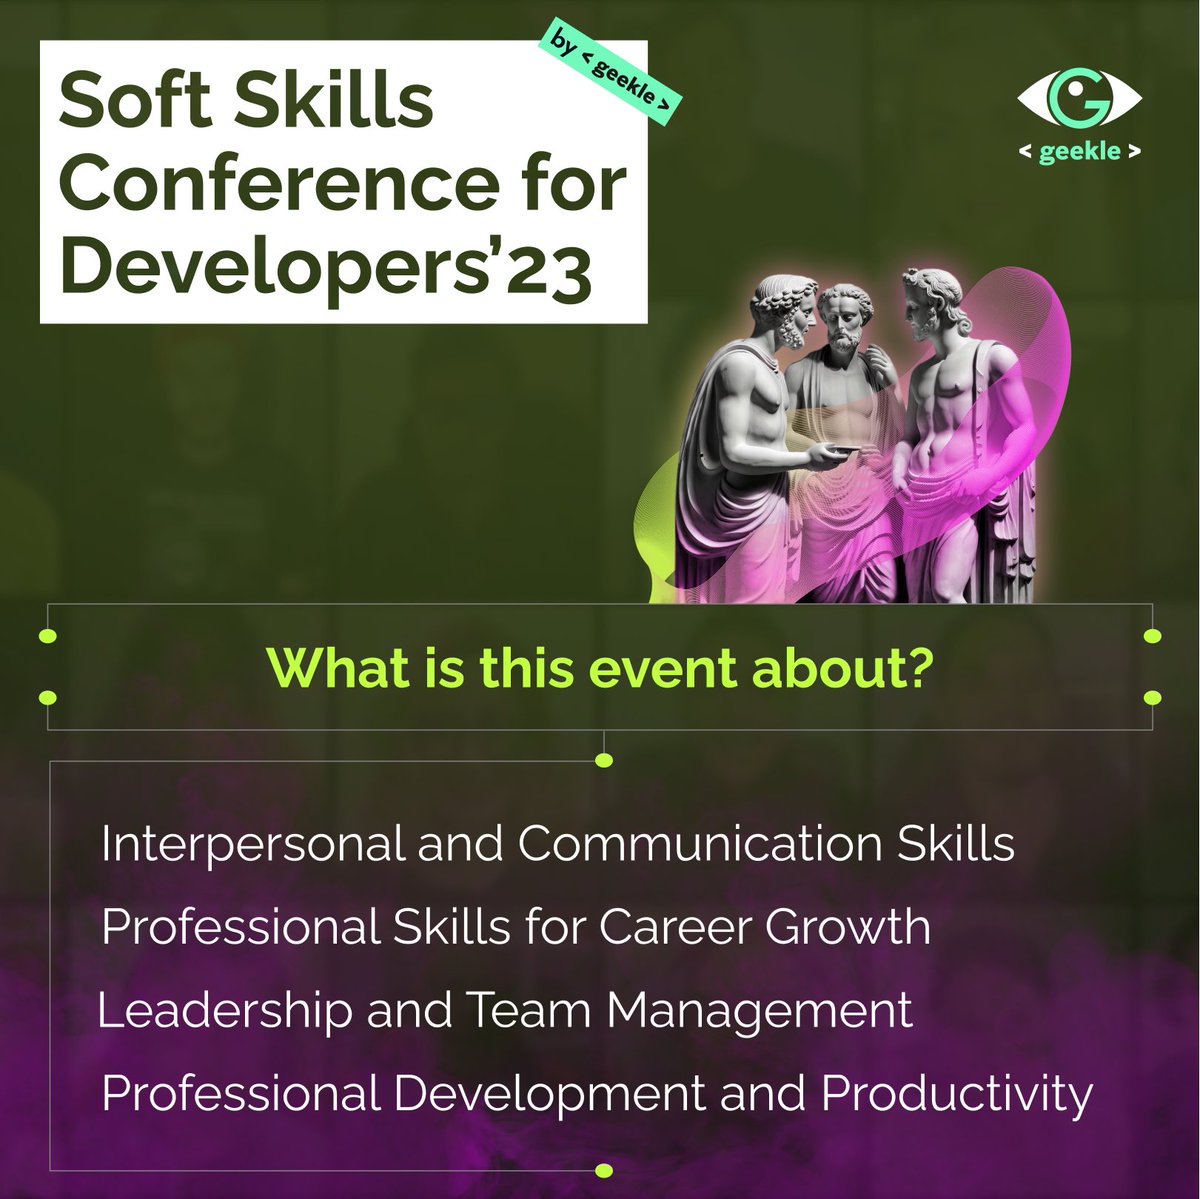 💥Soft Skills Conference for Developers'23💥 2023, June 27 What to expect? 🔹1000+ Registrations 🔹15+ Speakers 🔹12+ Hours of Deep Tech Content Buy your early bird ticket now events.geekle.us/softskills/